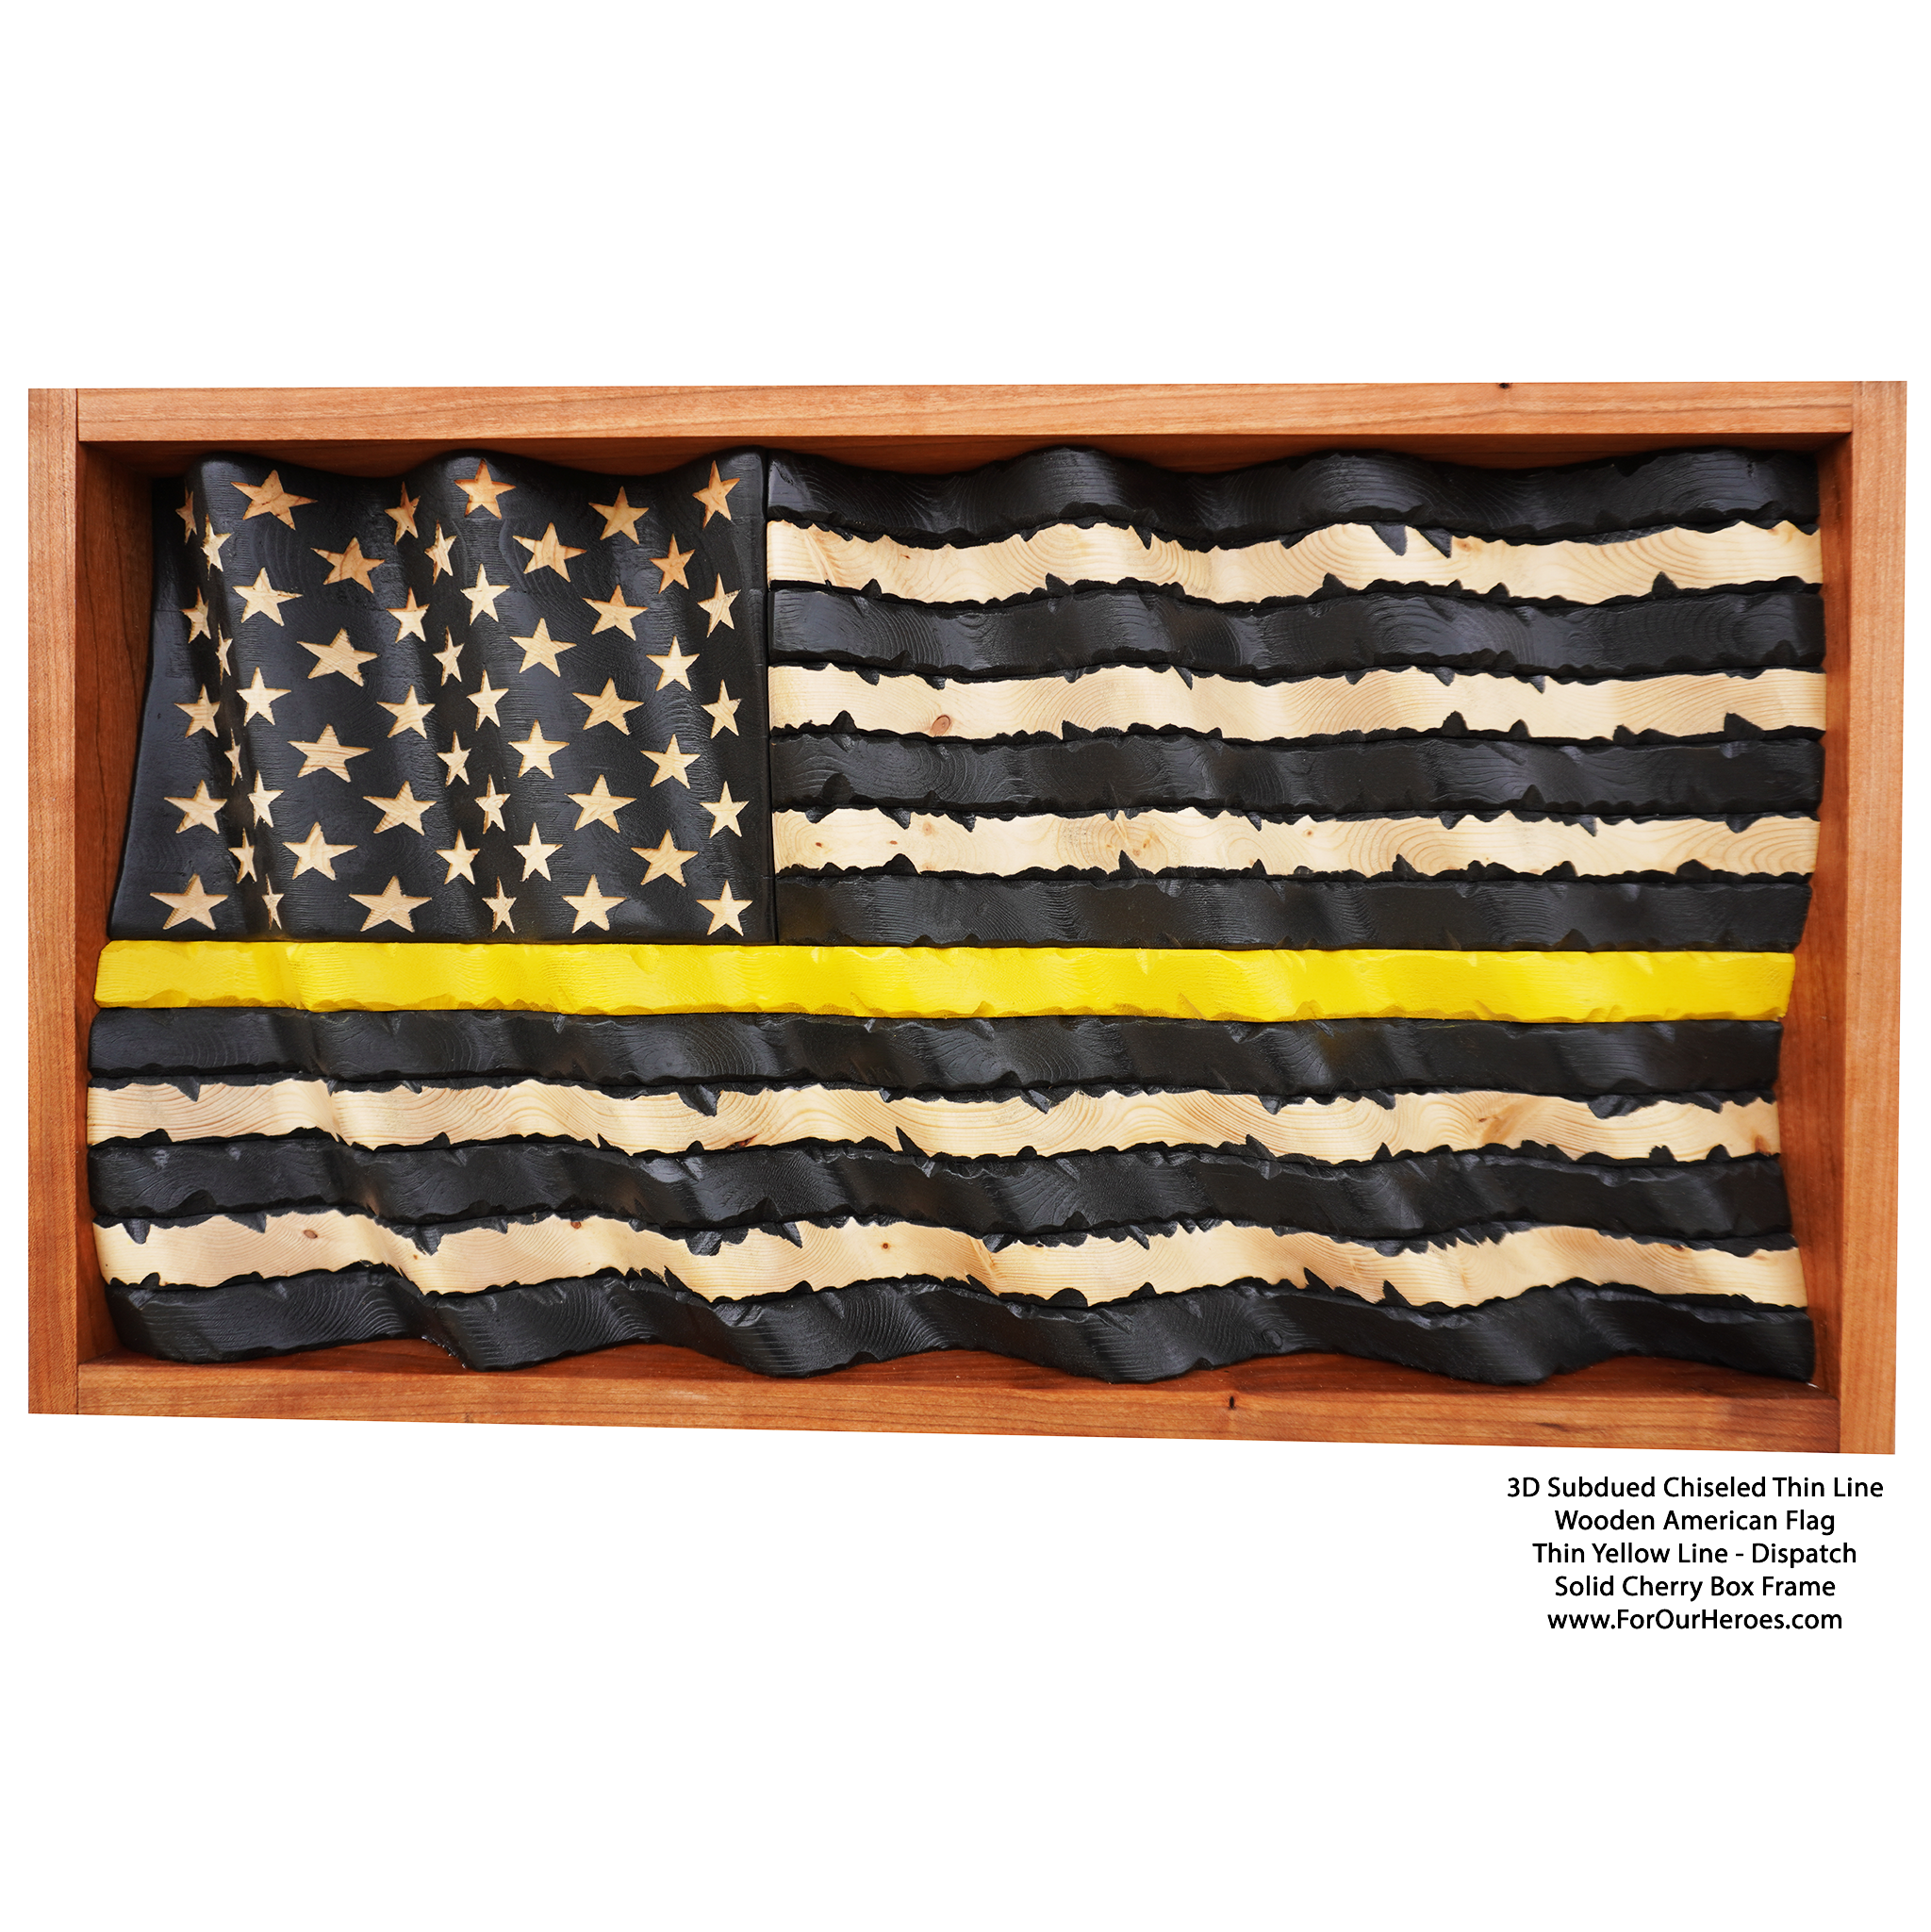 3D SUBDUED CHISELED THIN LINE American Flag (carved stars) - 0